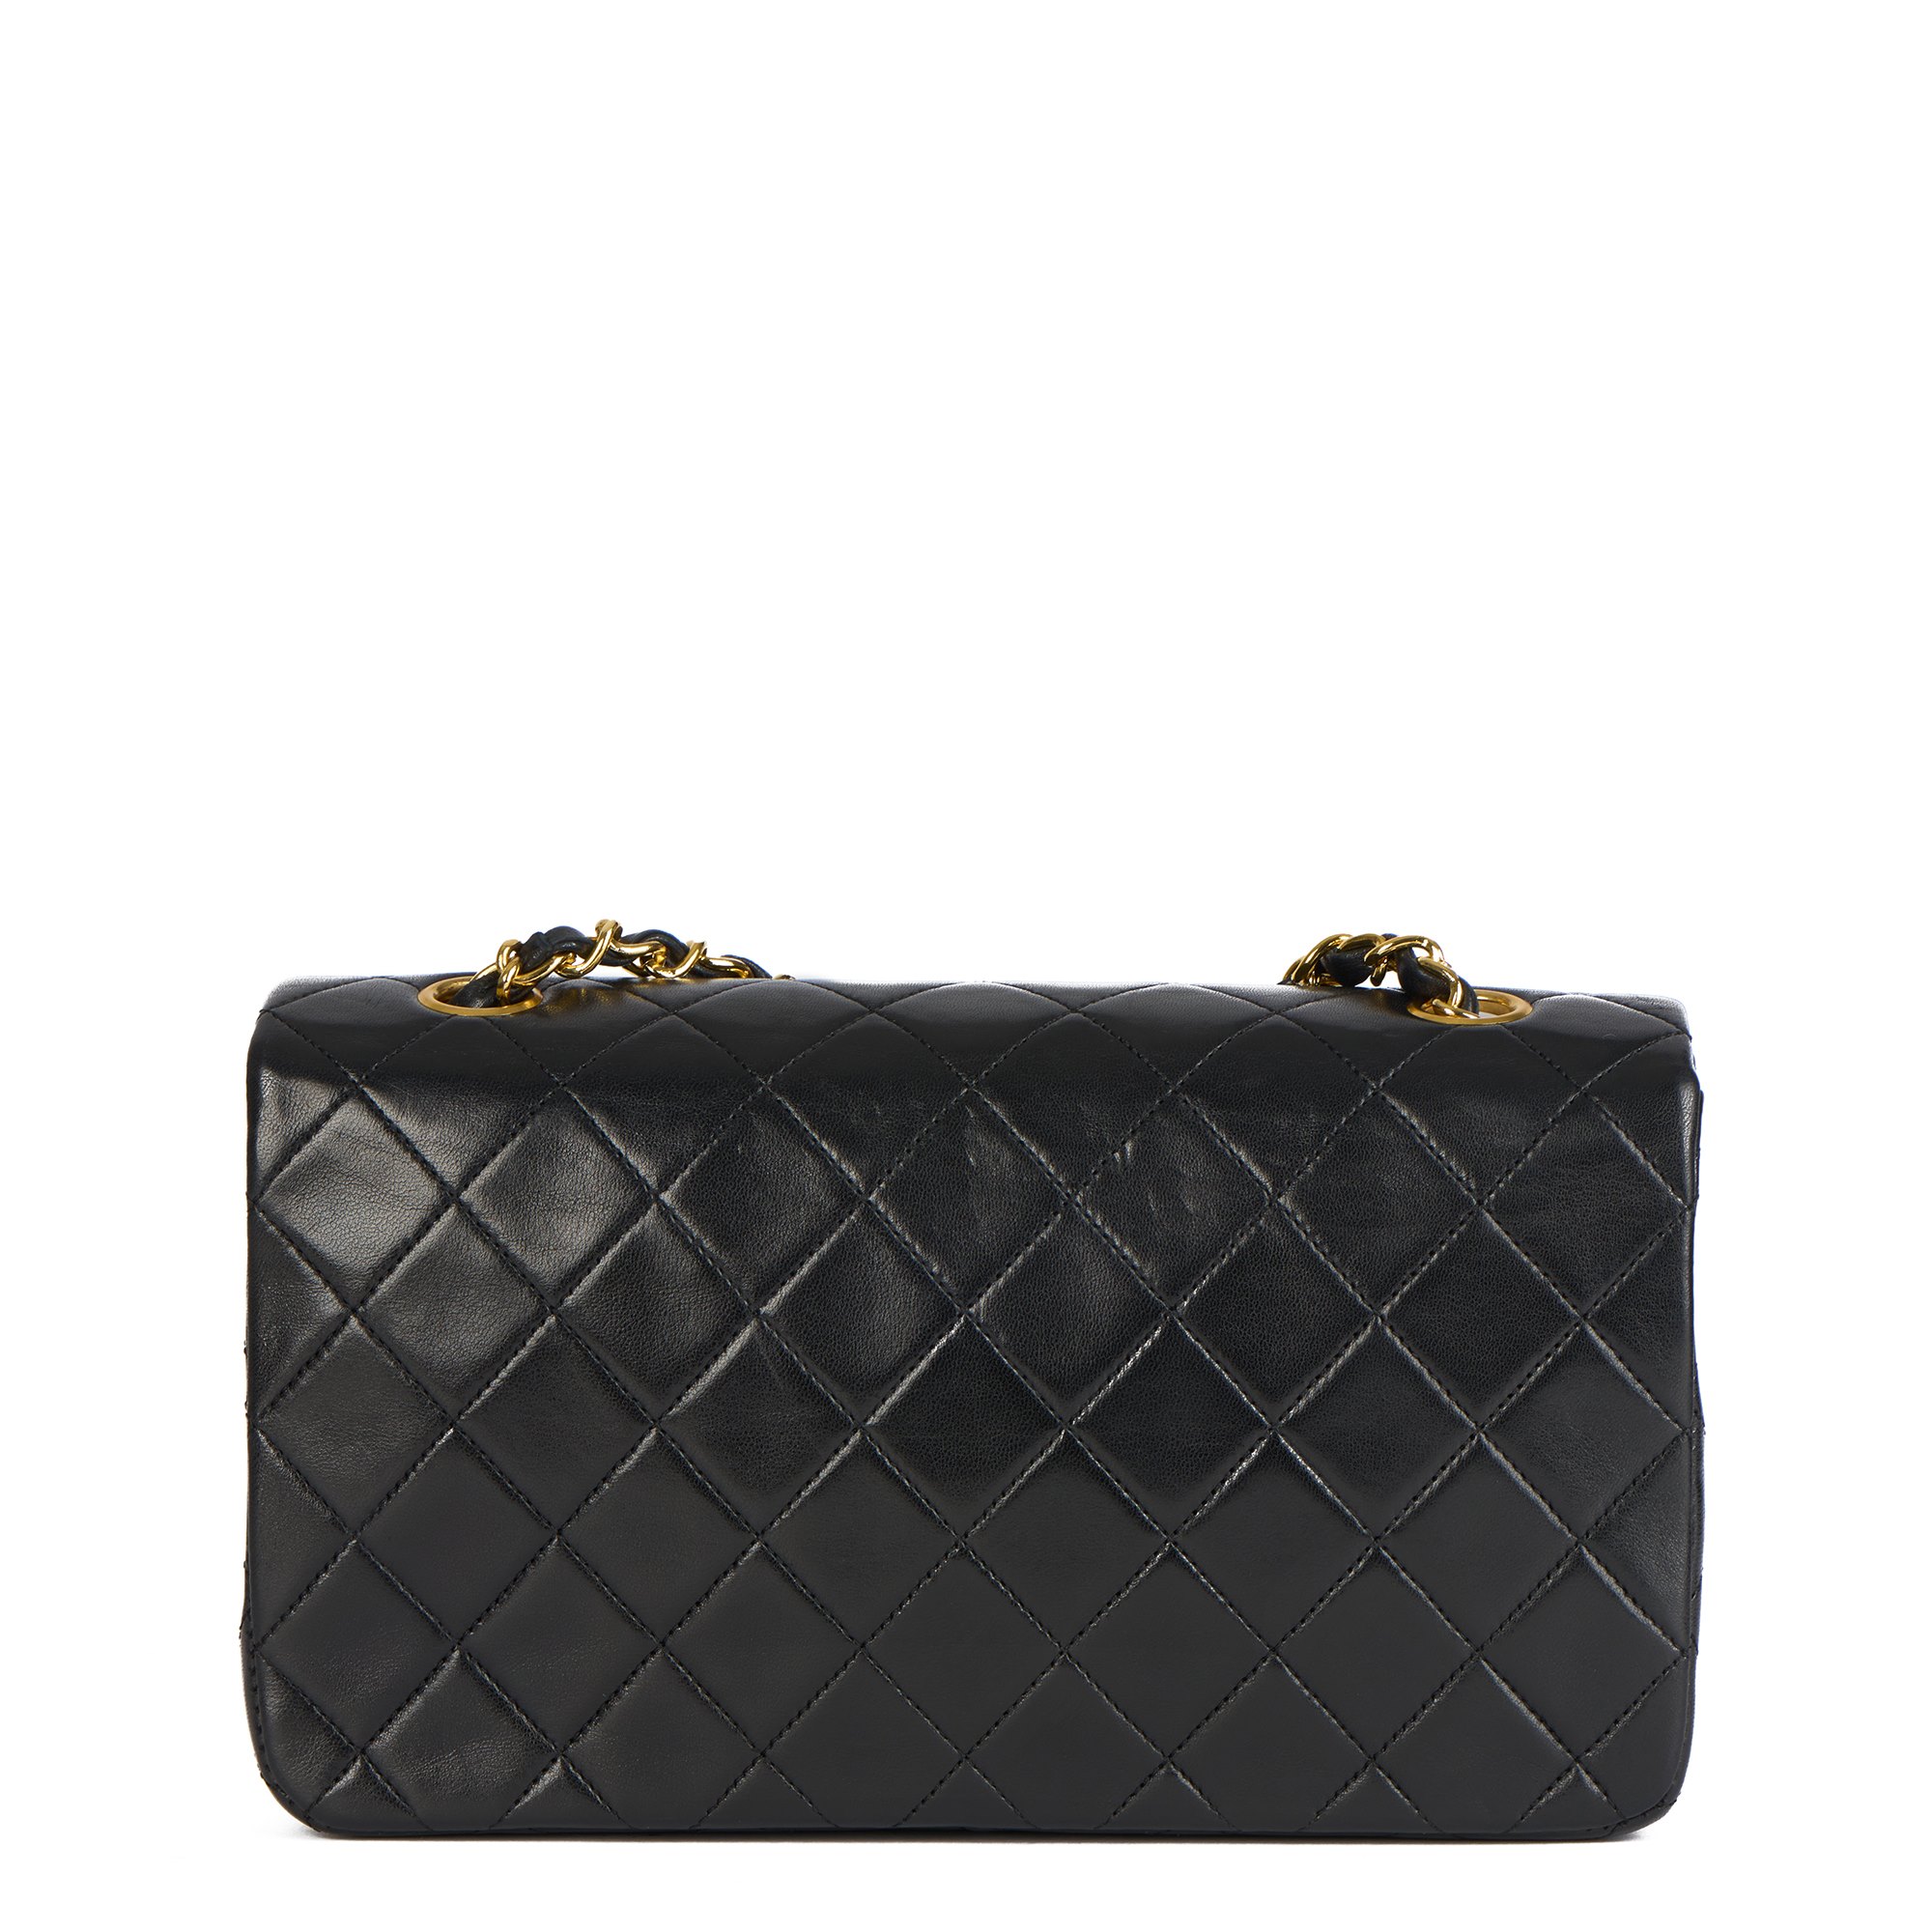 Chanel Black Quilted Lambskin Vintage Small Classic Single Full Flap Bag